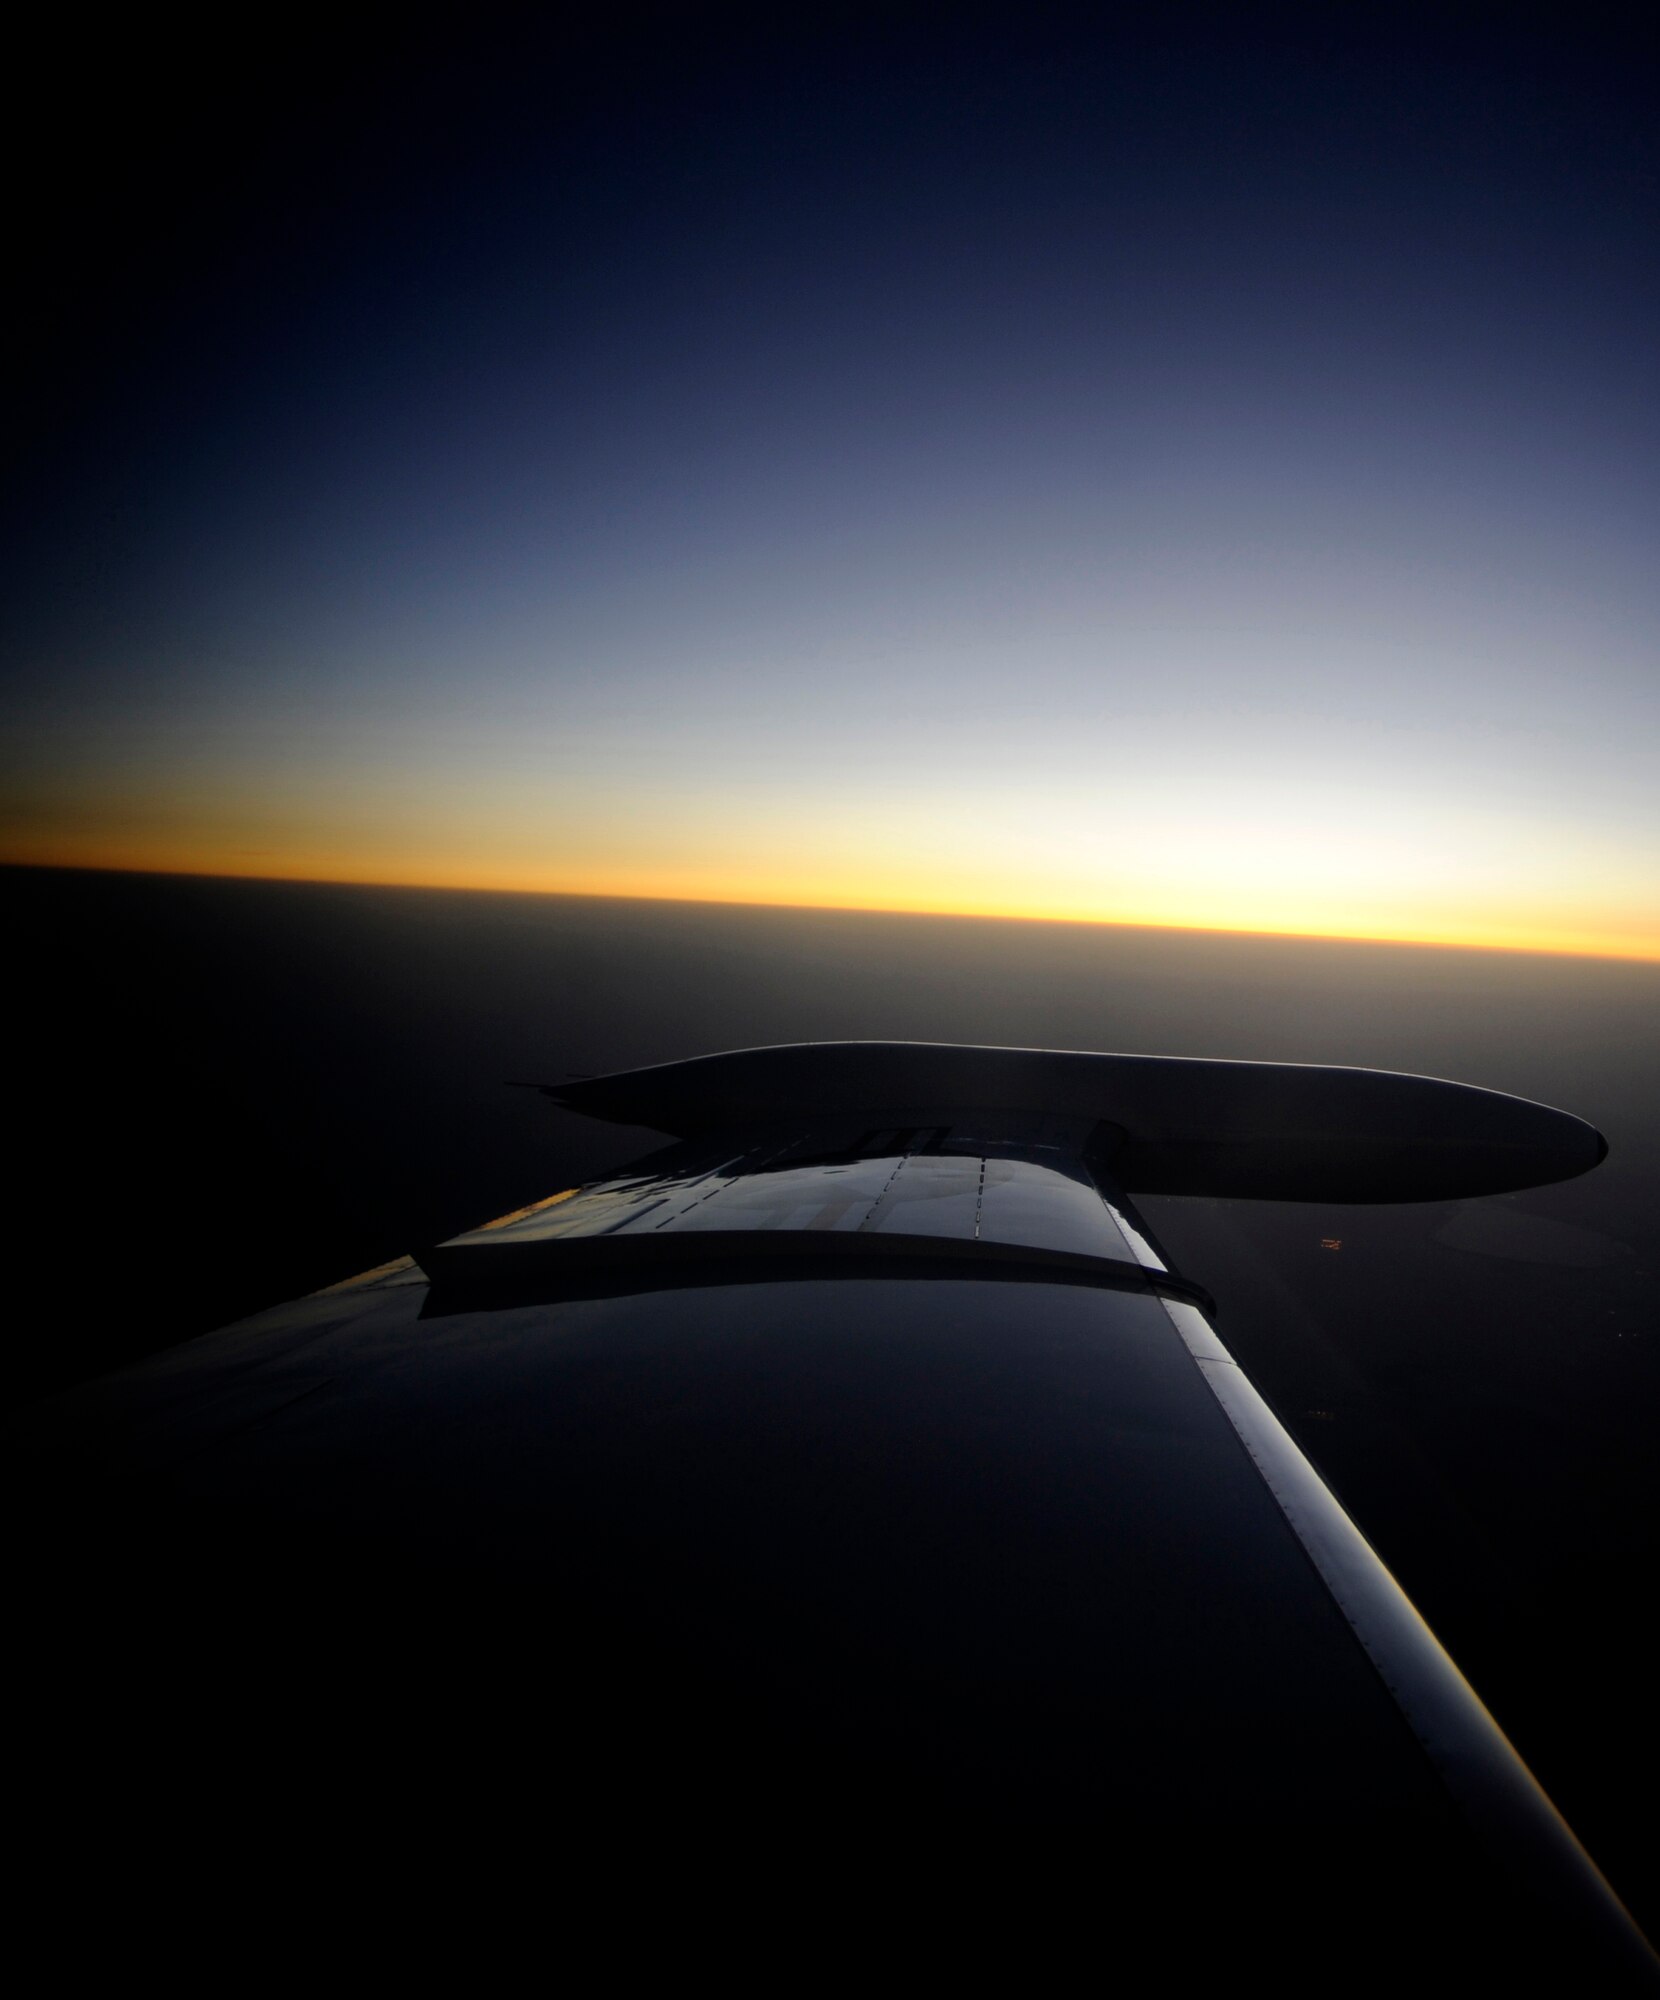 The wing of a U.S. Air Force C-21 from the 379th Expeditionary Operations Group, reflects the sunset during combat operations over Southwest Asia July 26, 2009. (U.S. Air Force photo by Staff Sgt. Shawn Weismiller/released)